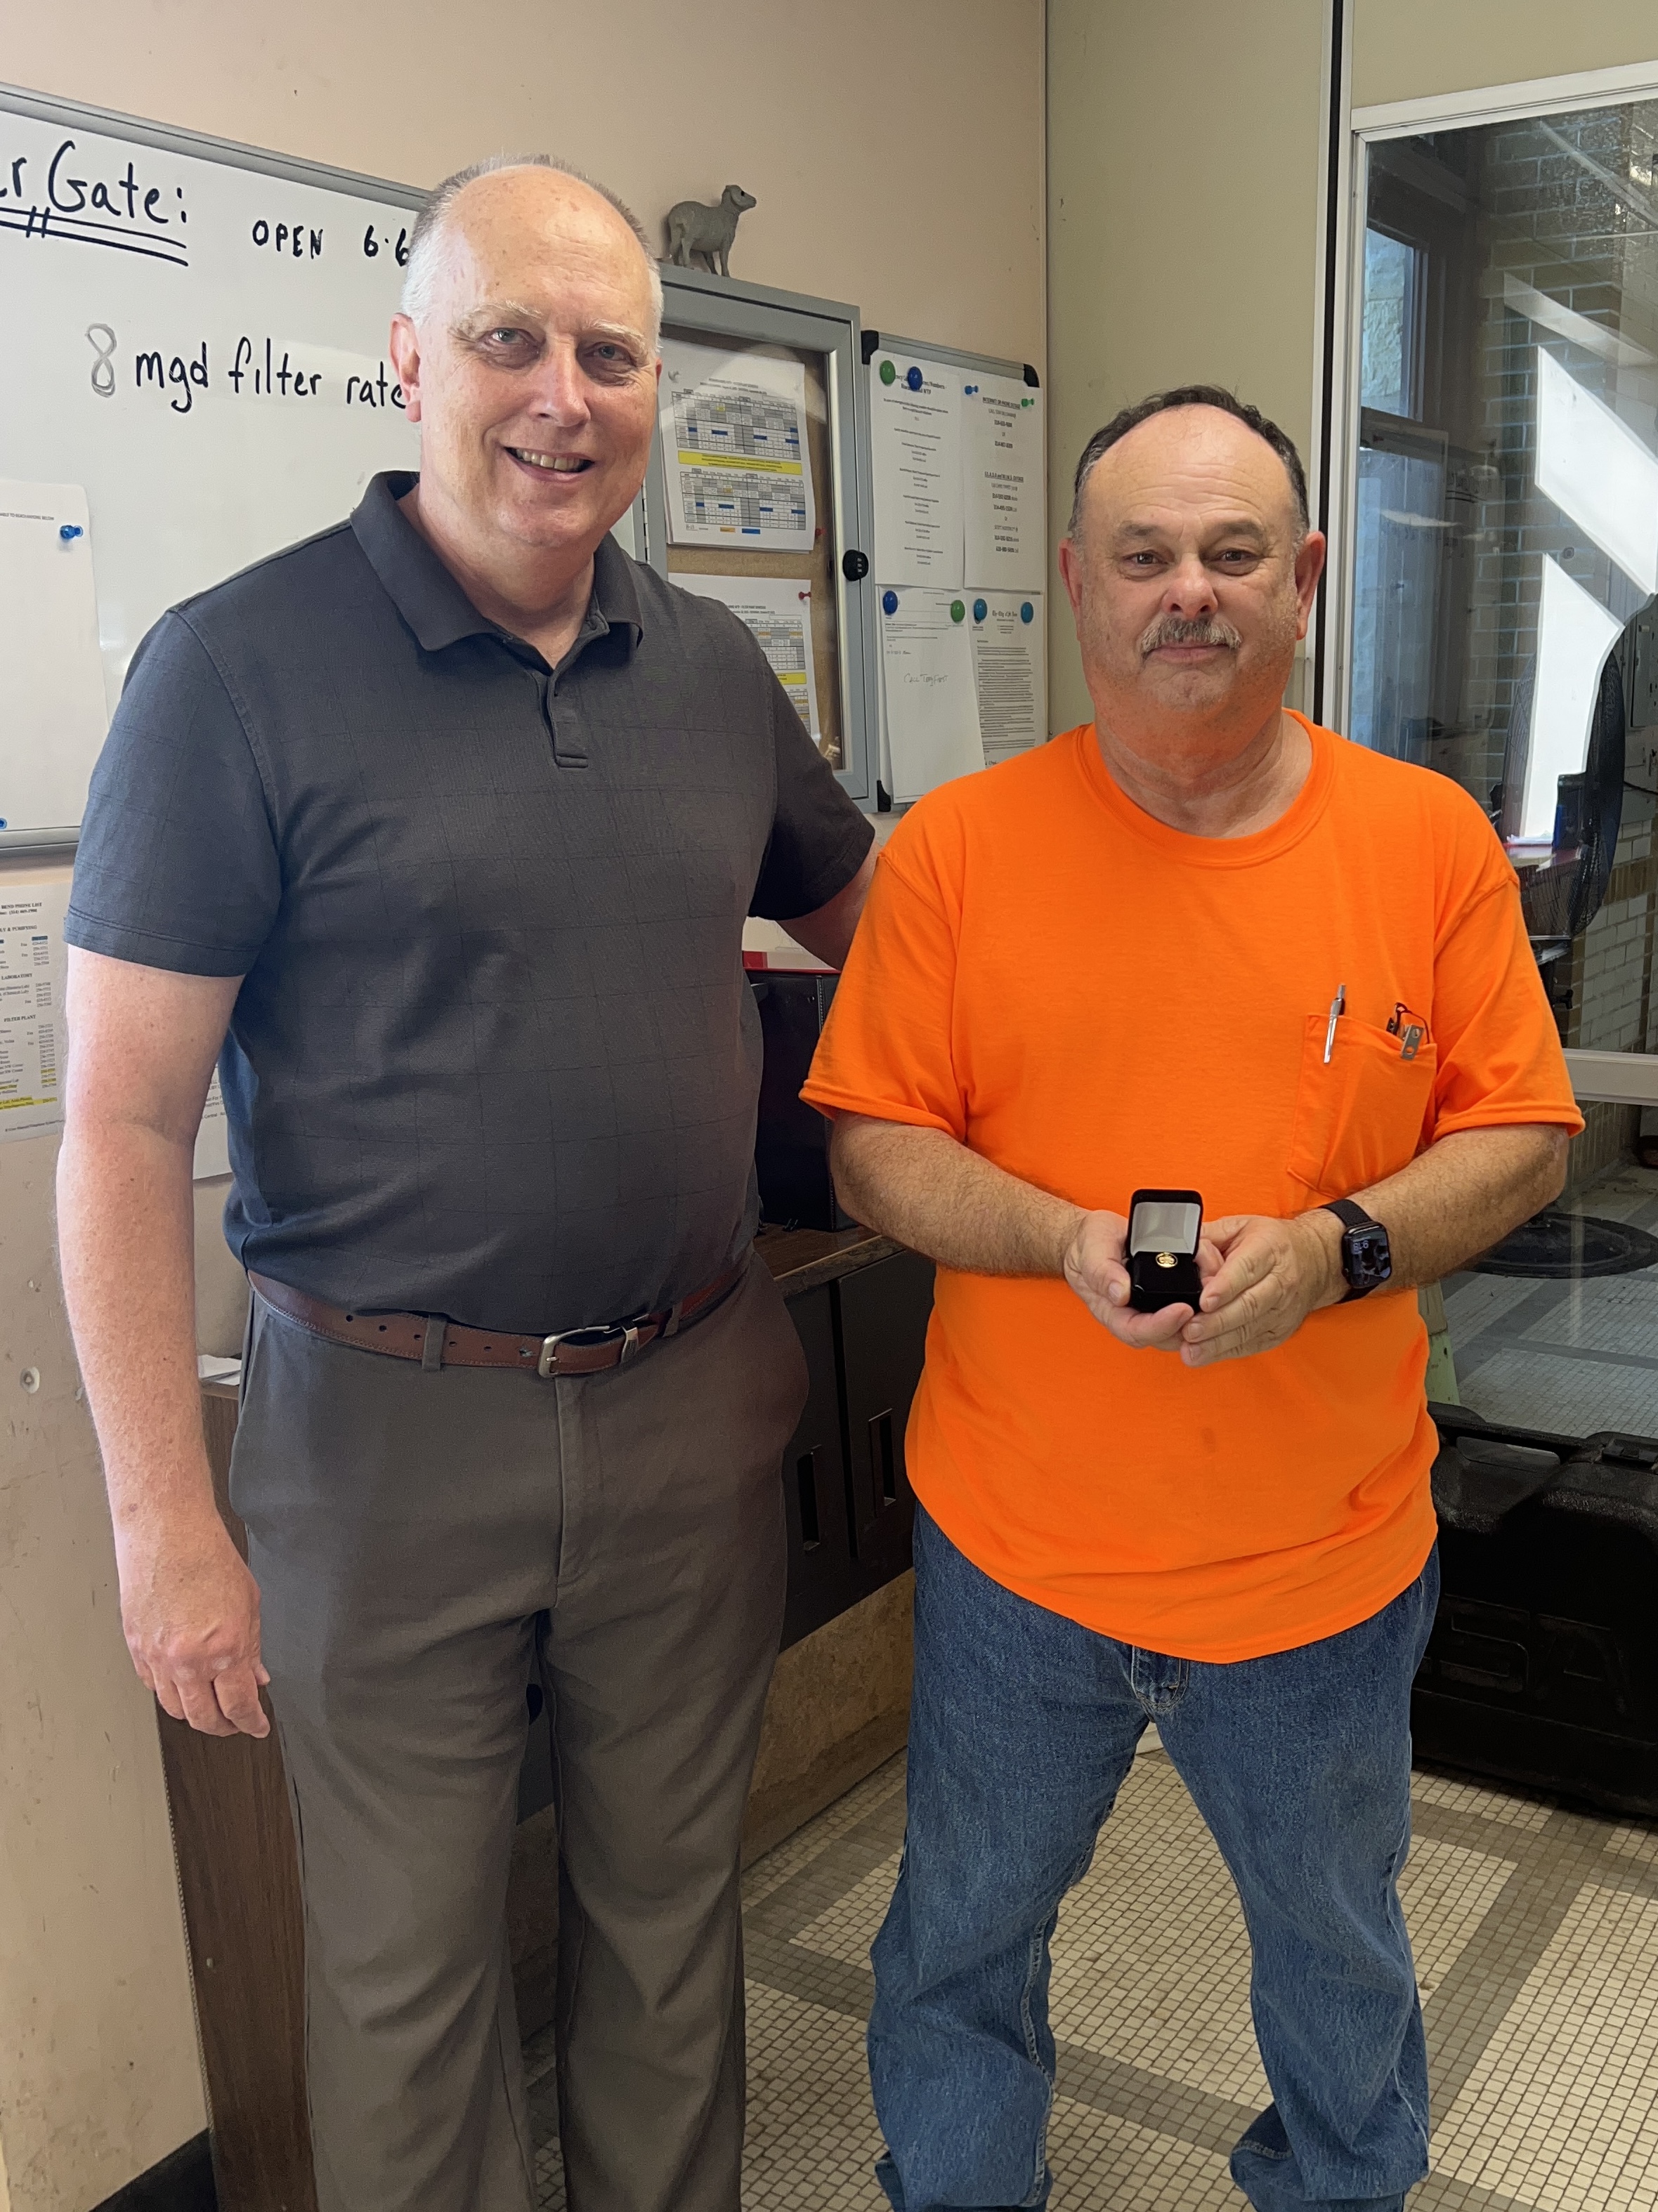 Director of Public Utilities Curtis B. Skouby, P.E., presents a 40-year service pin to Rick Mattingly